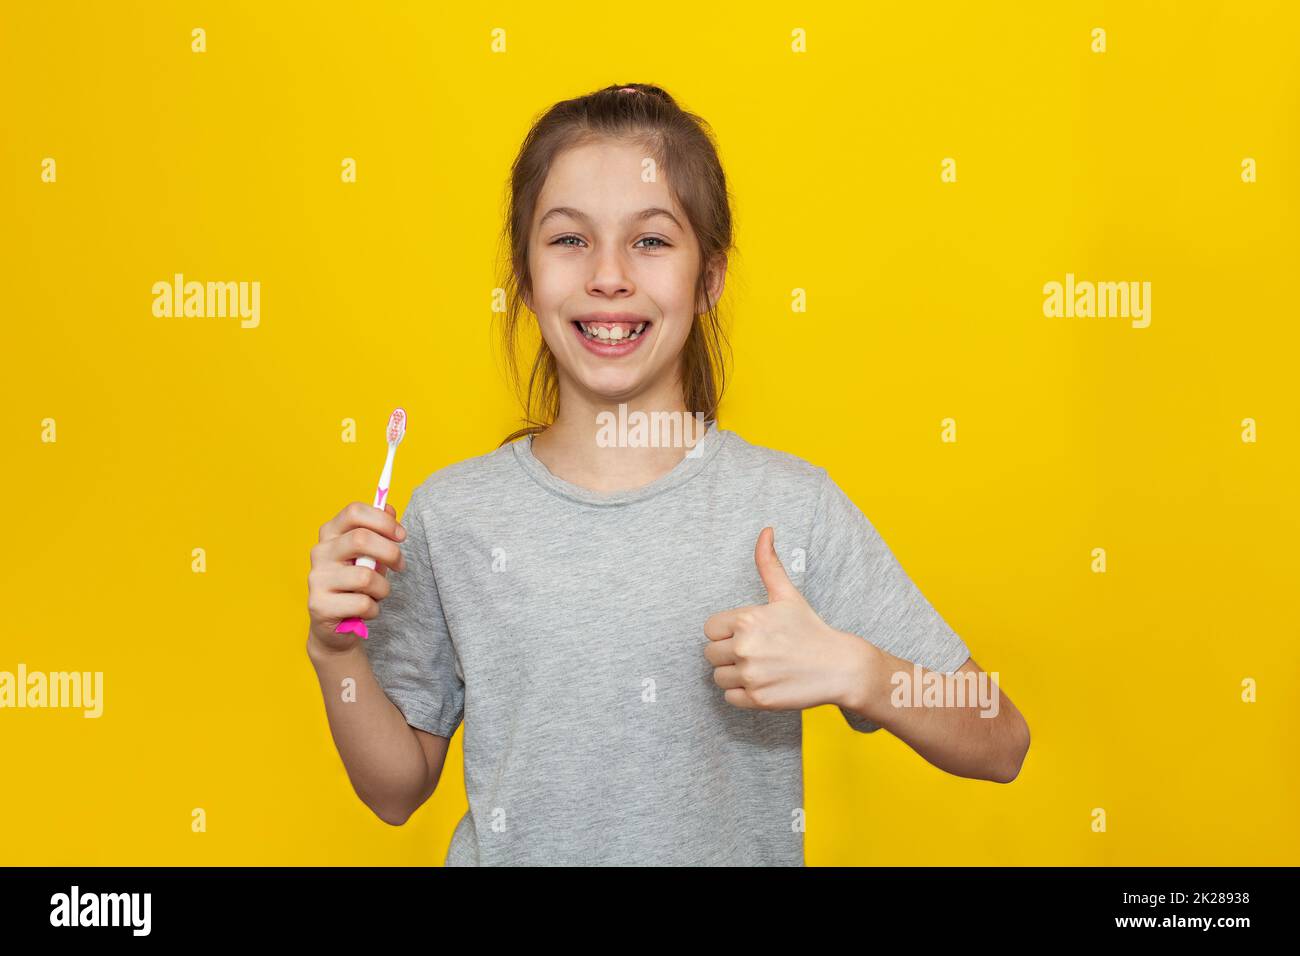 Beautiful brown-haired teenage girl holding brushing her teeth with toothbrush on a yellow background, Children nutrition and oral hygiene concept Stock Photo